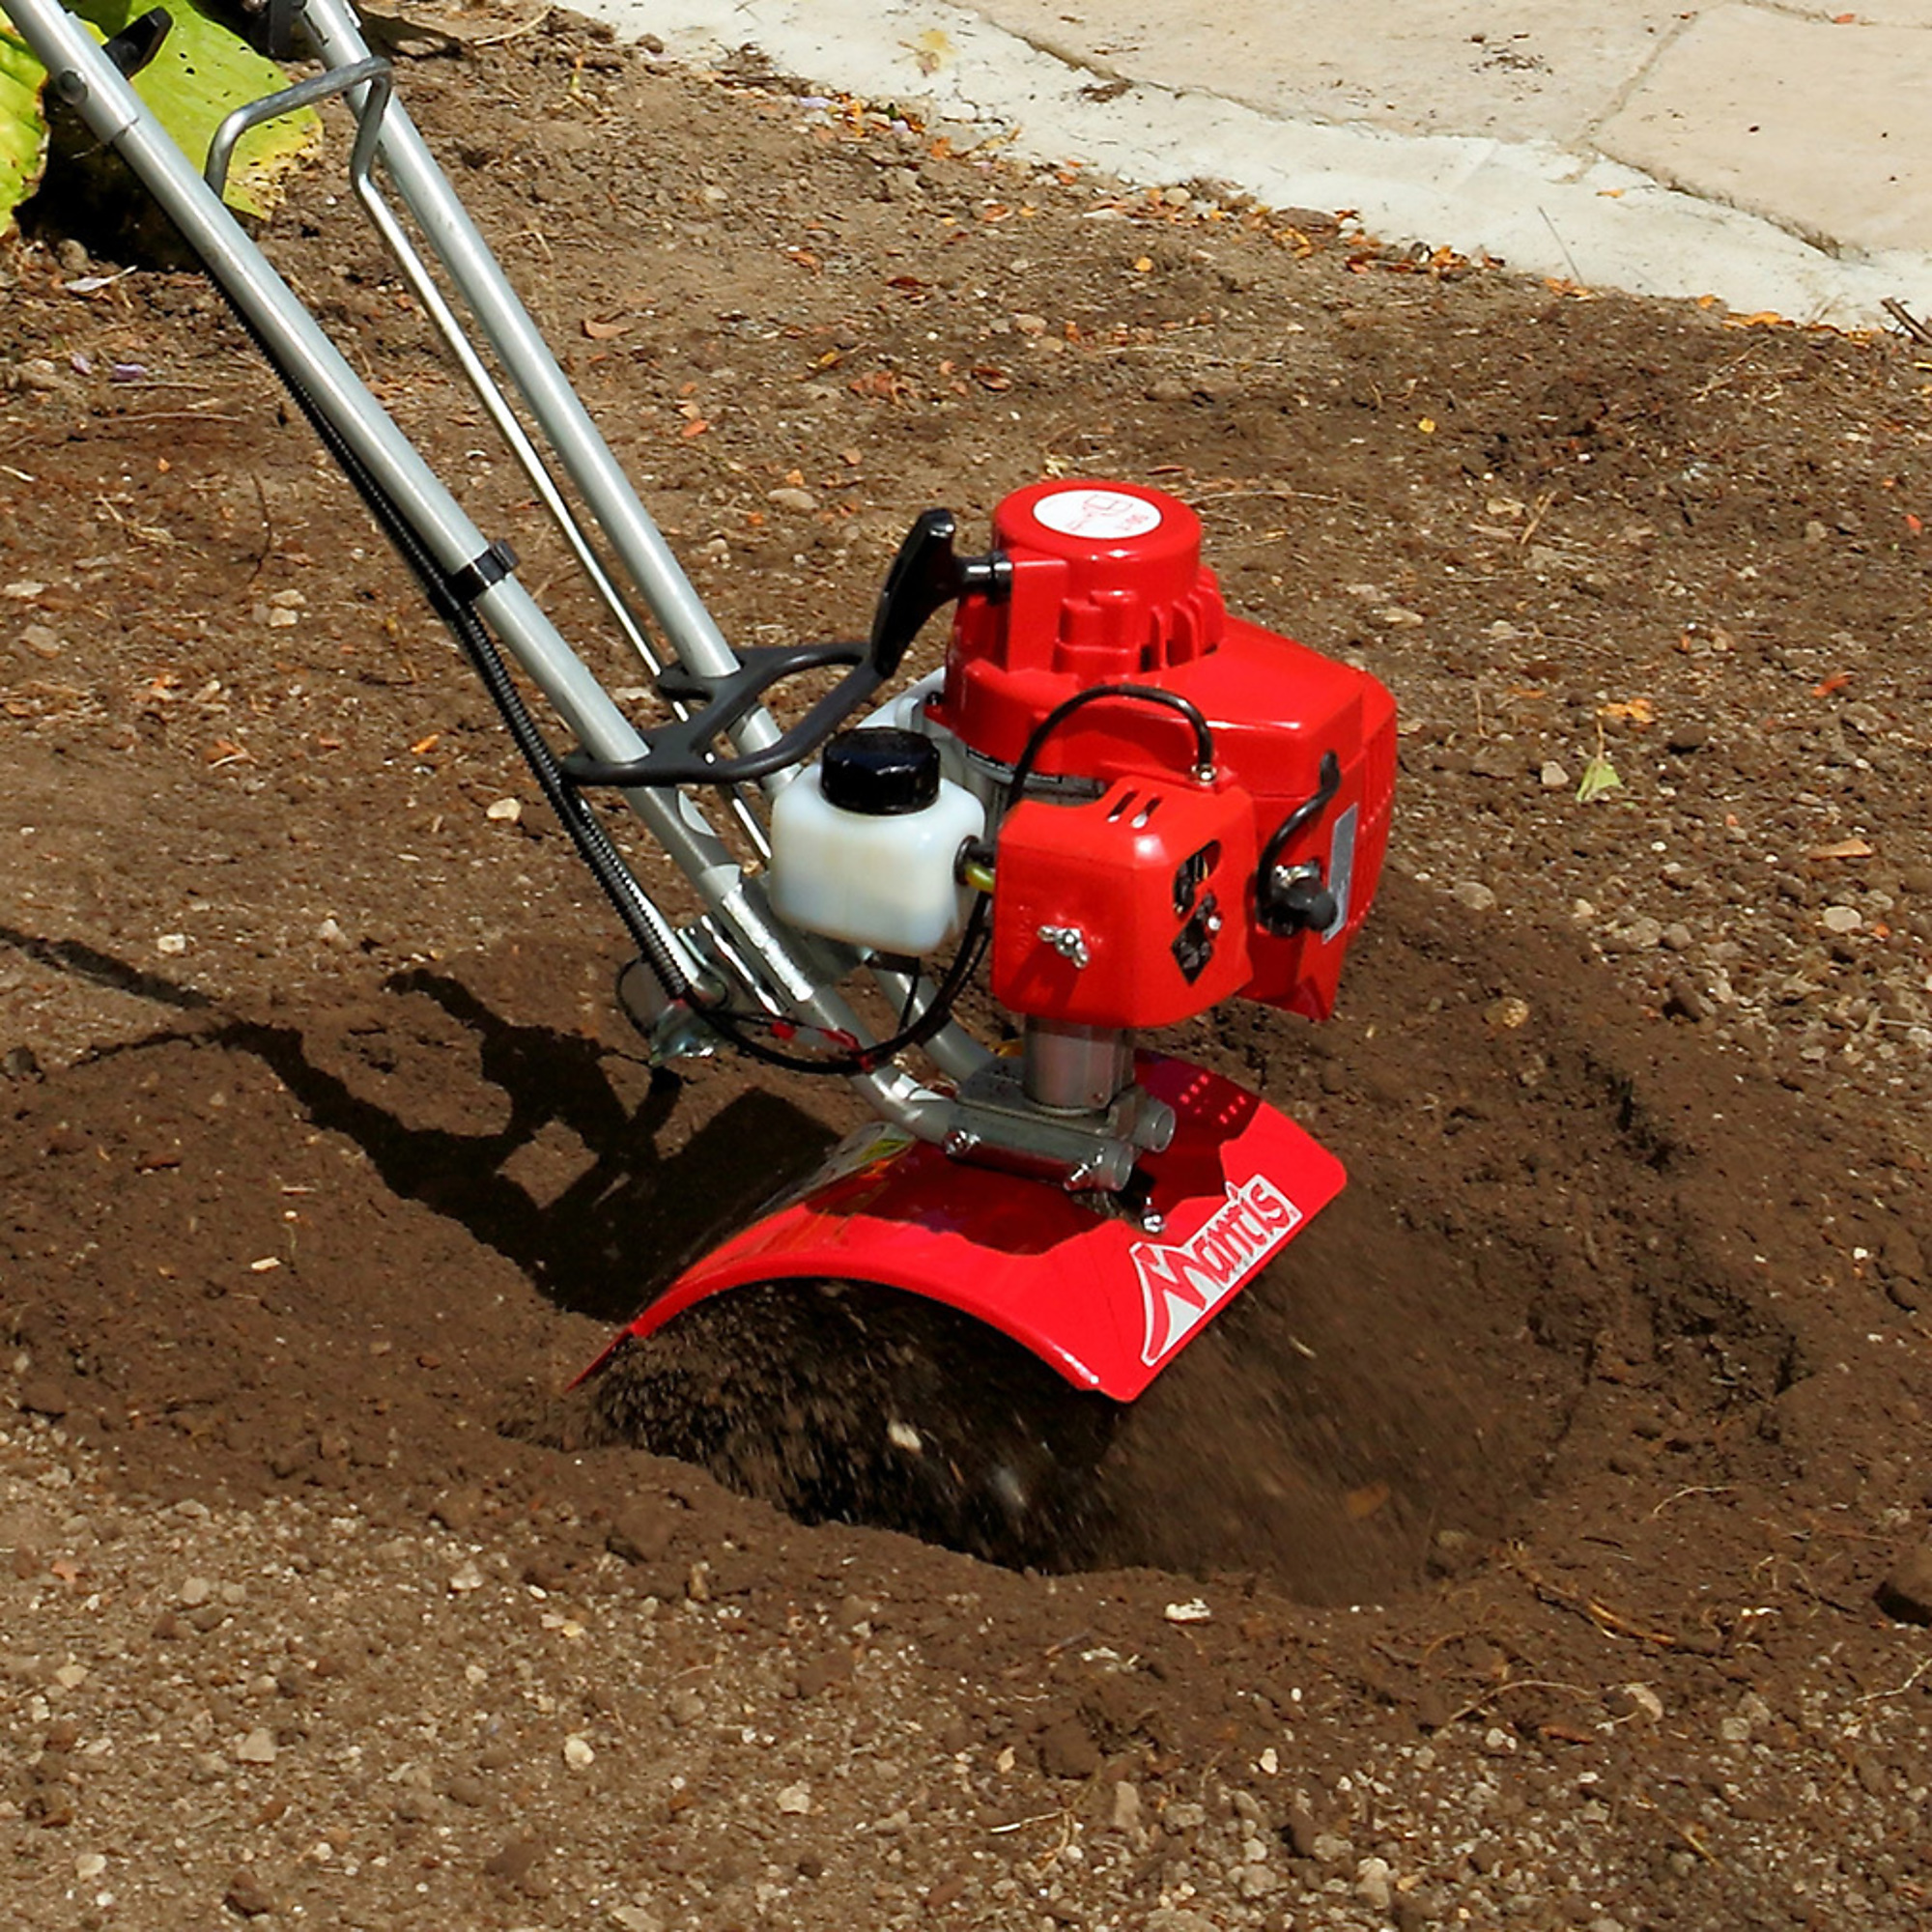 Mantis, 2-Cycle Tiller/Cultivator w/Kickstand FastStart, Max. Working Width 9 in, Engine Displacement 21 cc, Model 7924